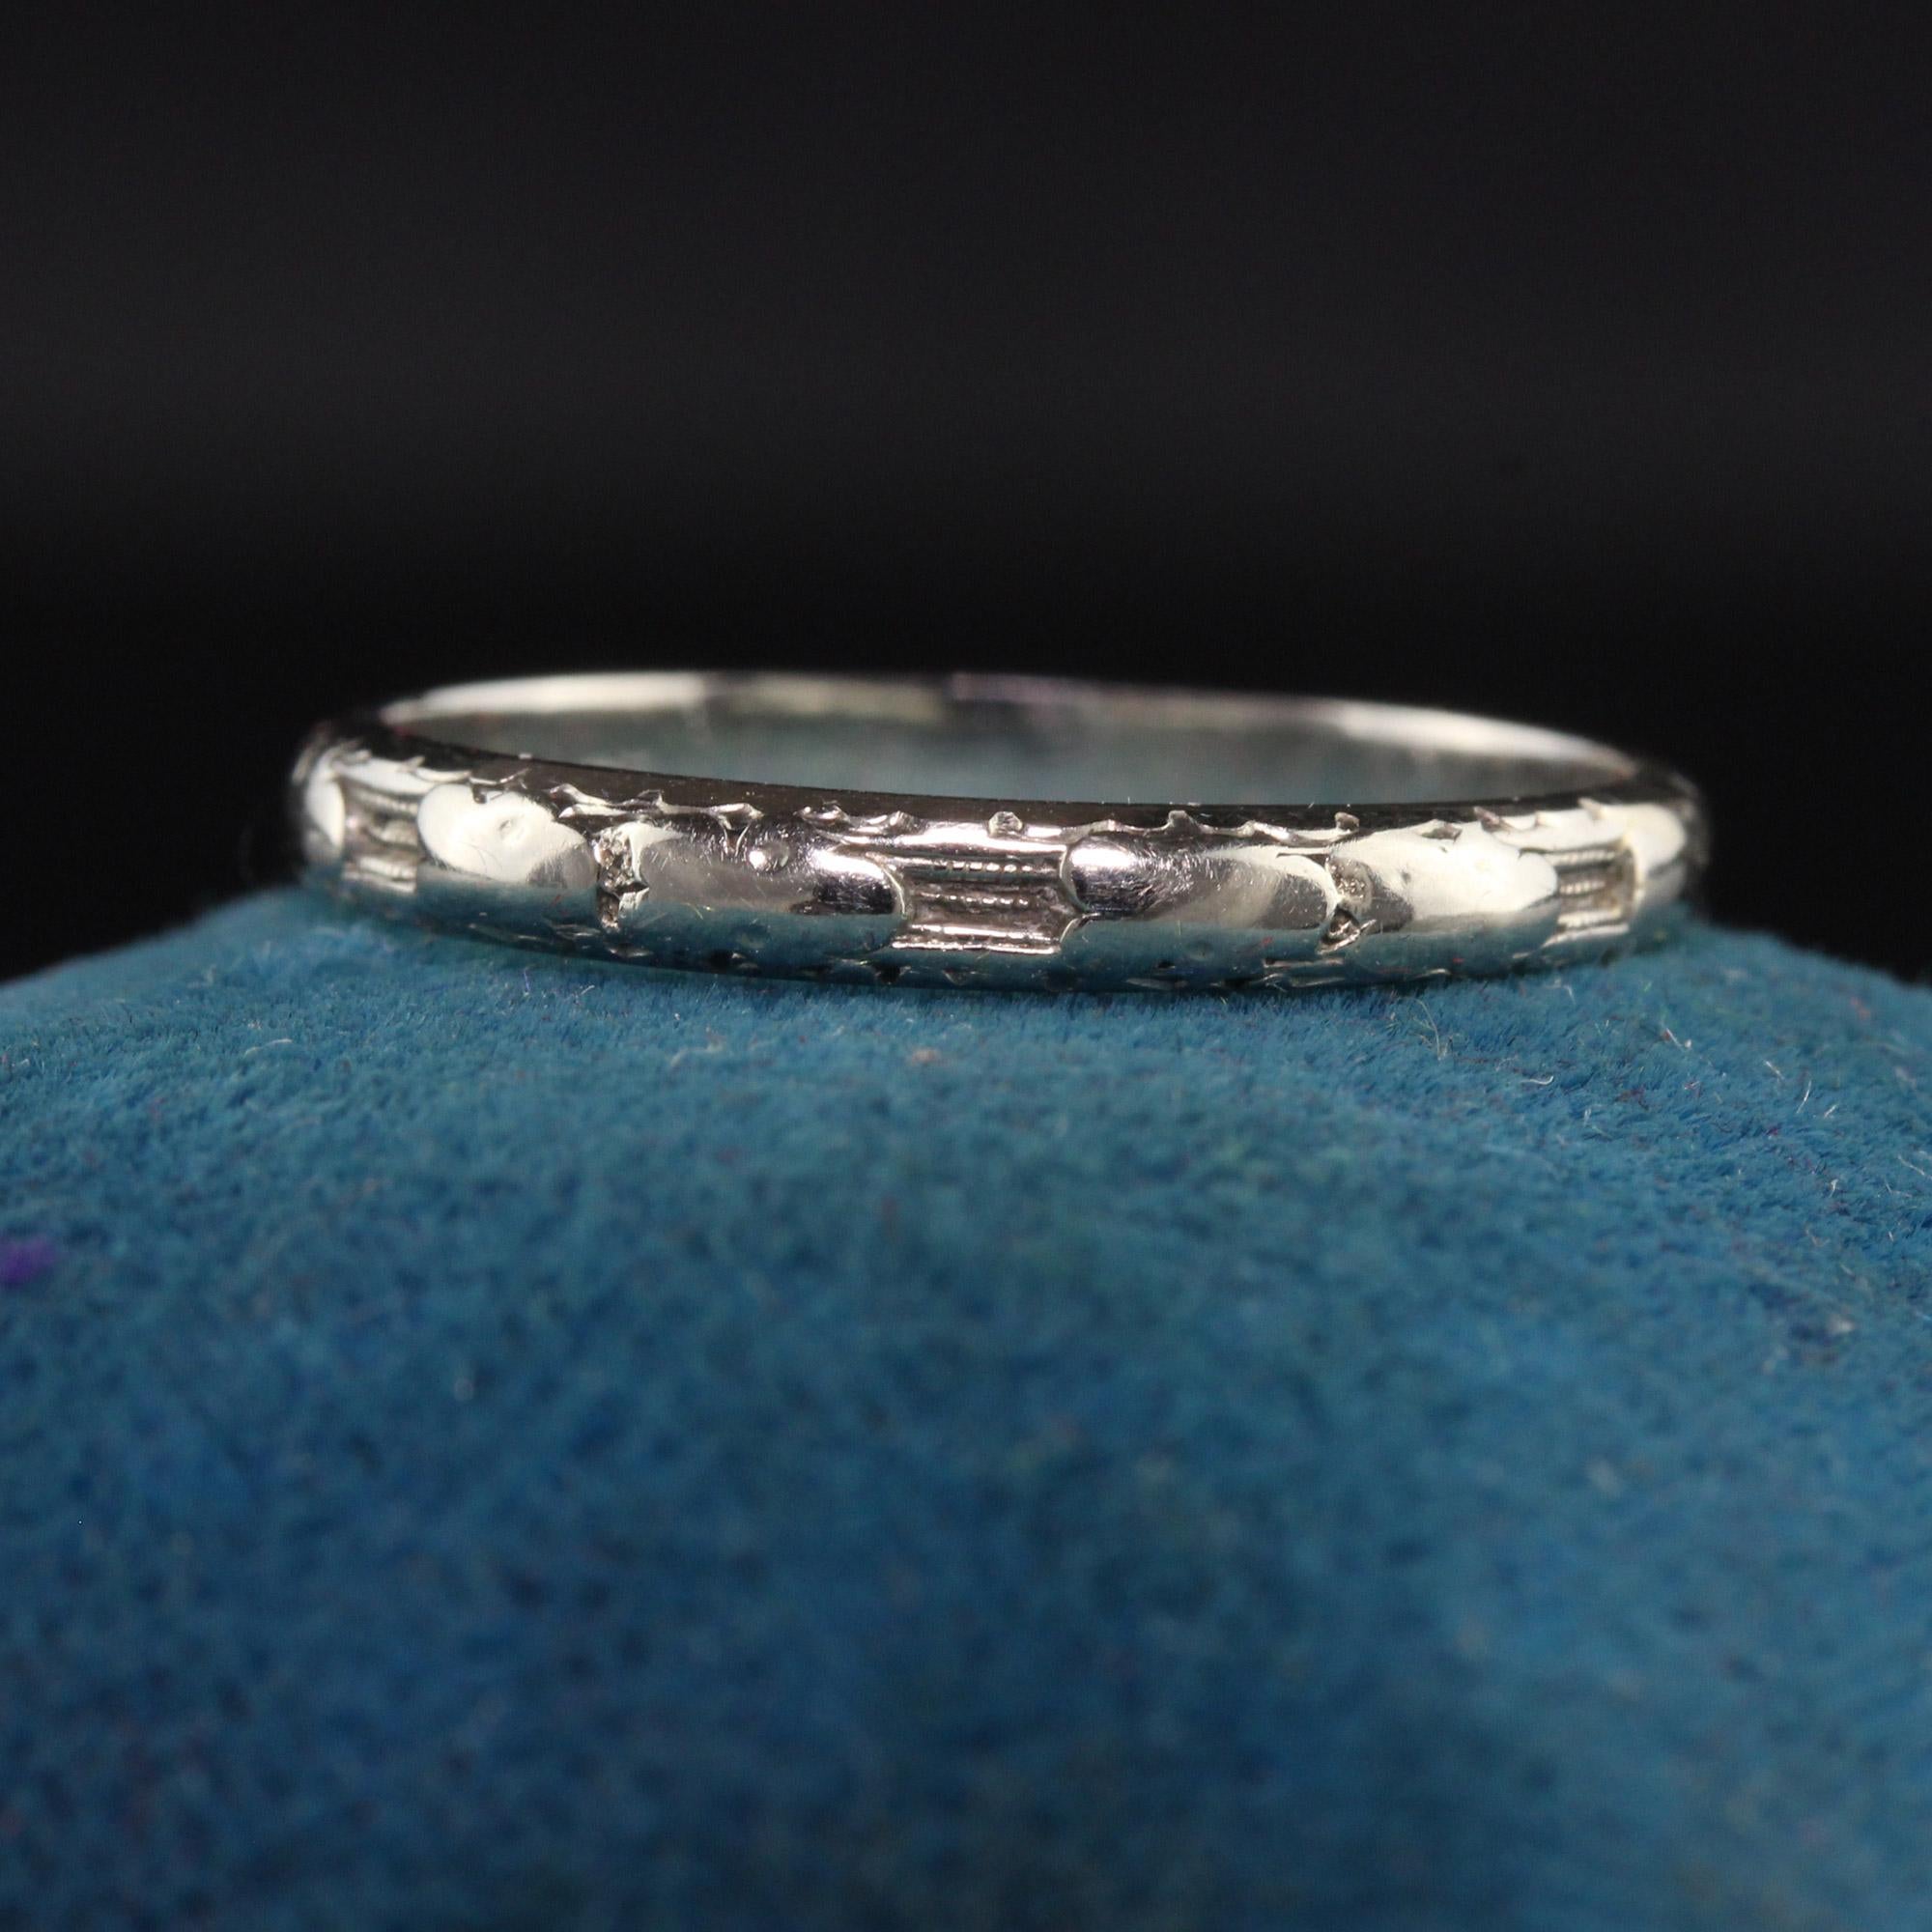 Beautiful Antique Art Deco 18K White Gold Engraved Wedding Band - Size 6. This beautiful wedding band is crafted in 18k white gold. The ring has an interesting design going around the ring with one part of it that aooears to have been sized. It is